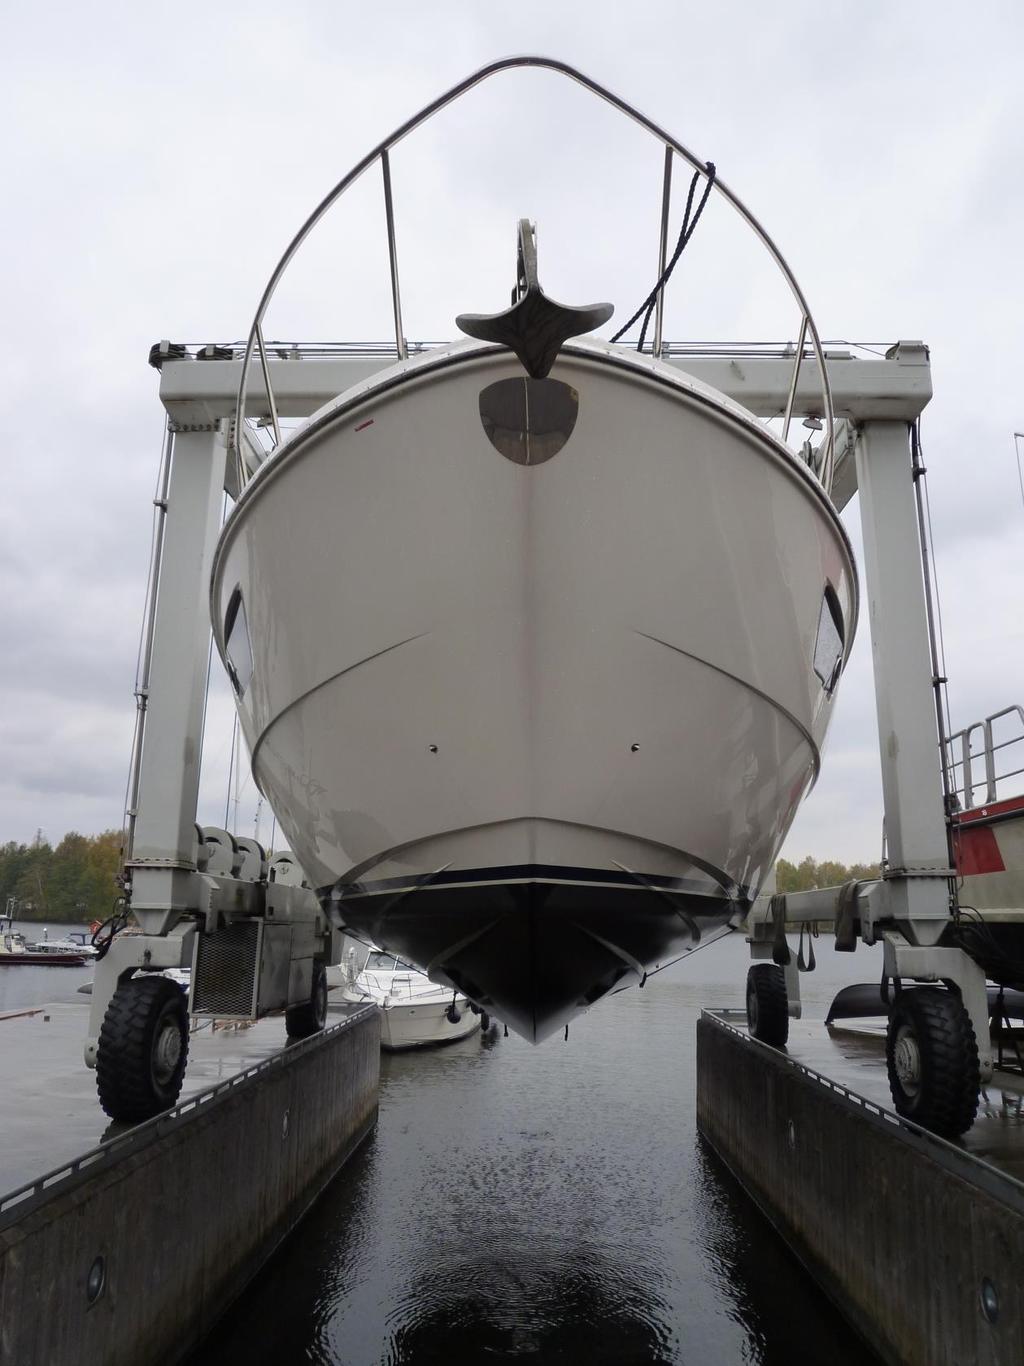 Observed during the survey: Hull outside, above the waterline: -The outside of the hull is in